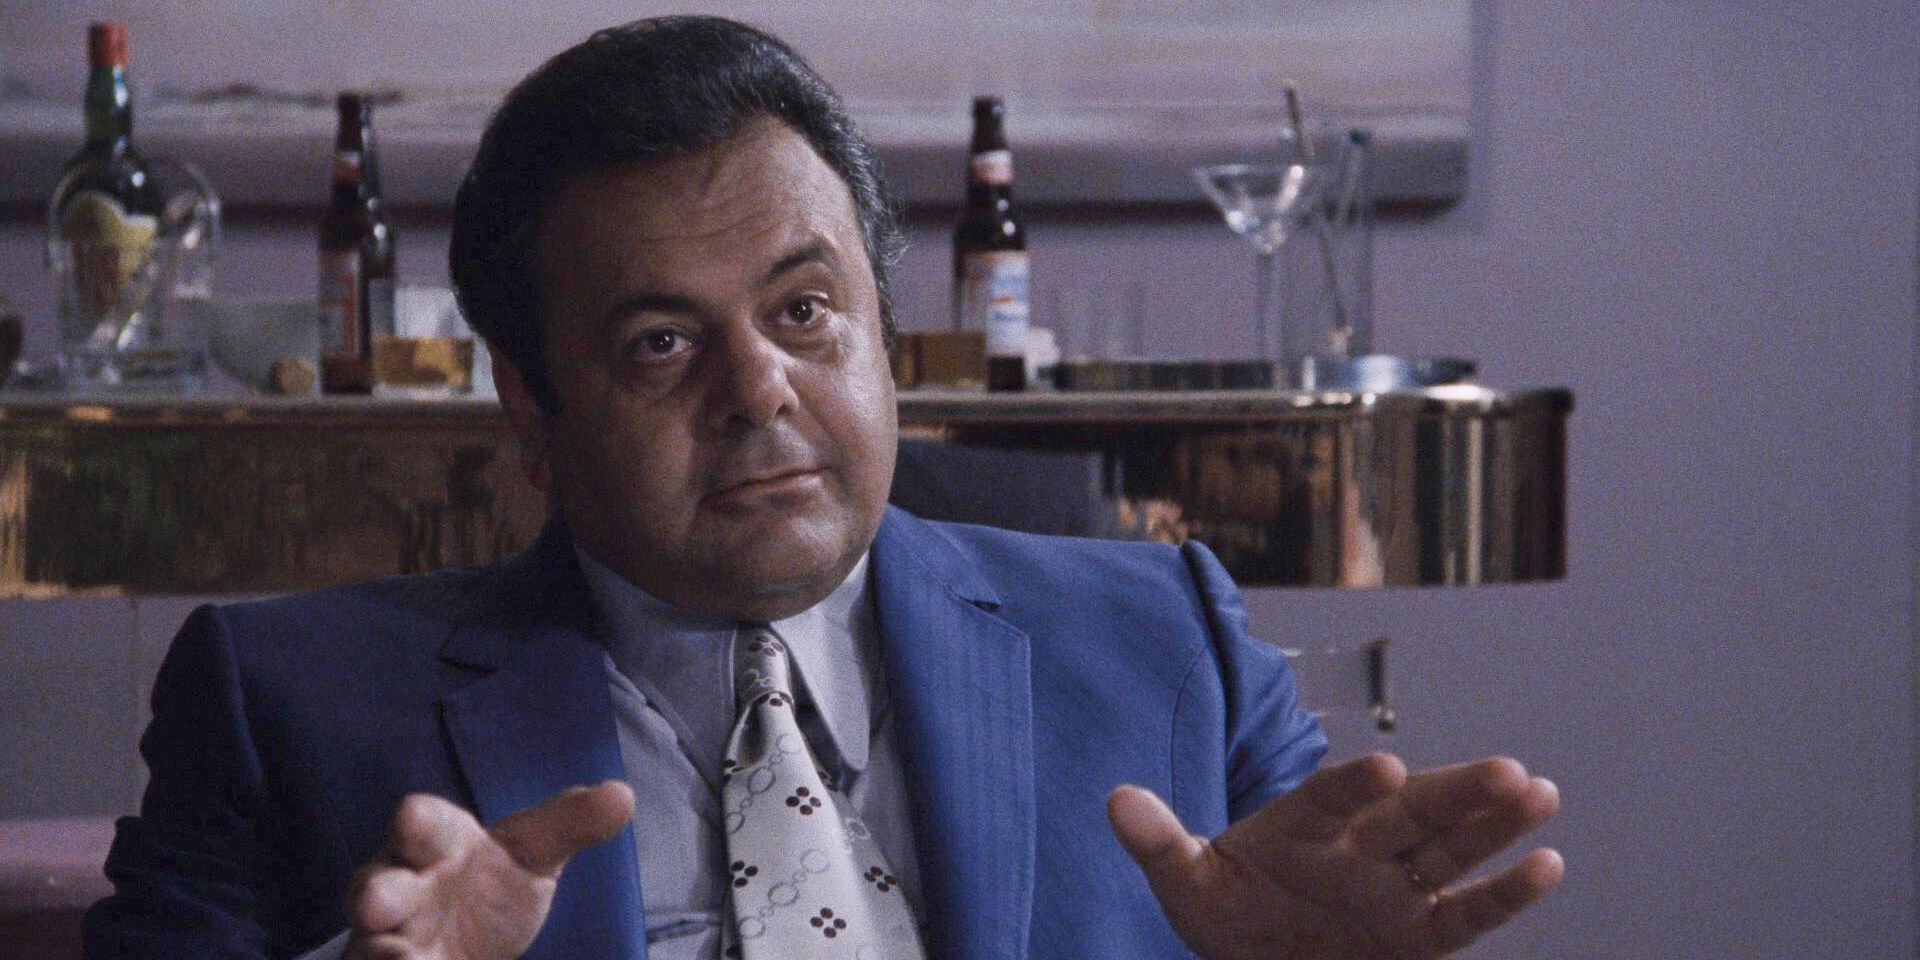 Paul Cicero as he's depicted in the 1990 crime drama film Goodfellas.